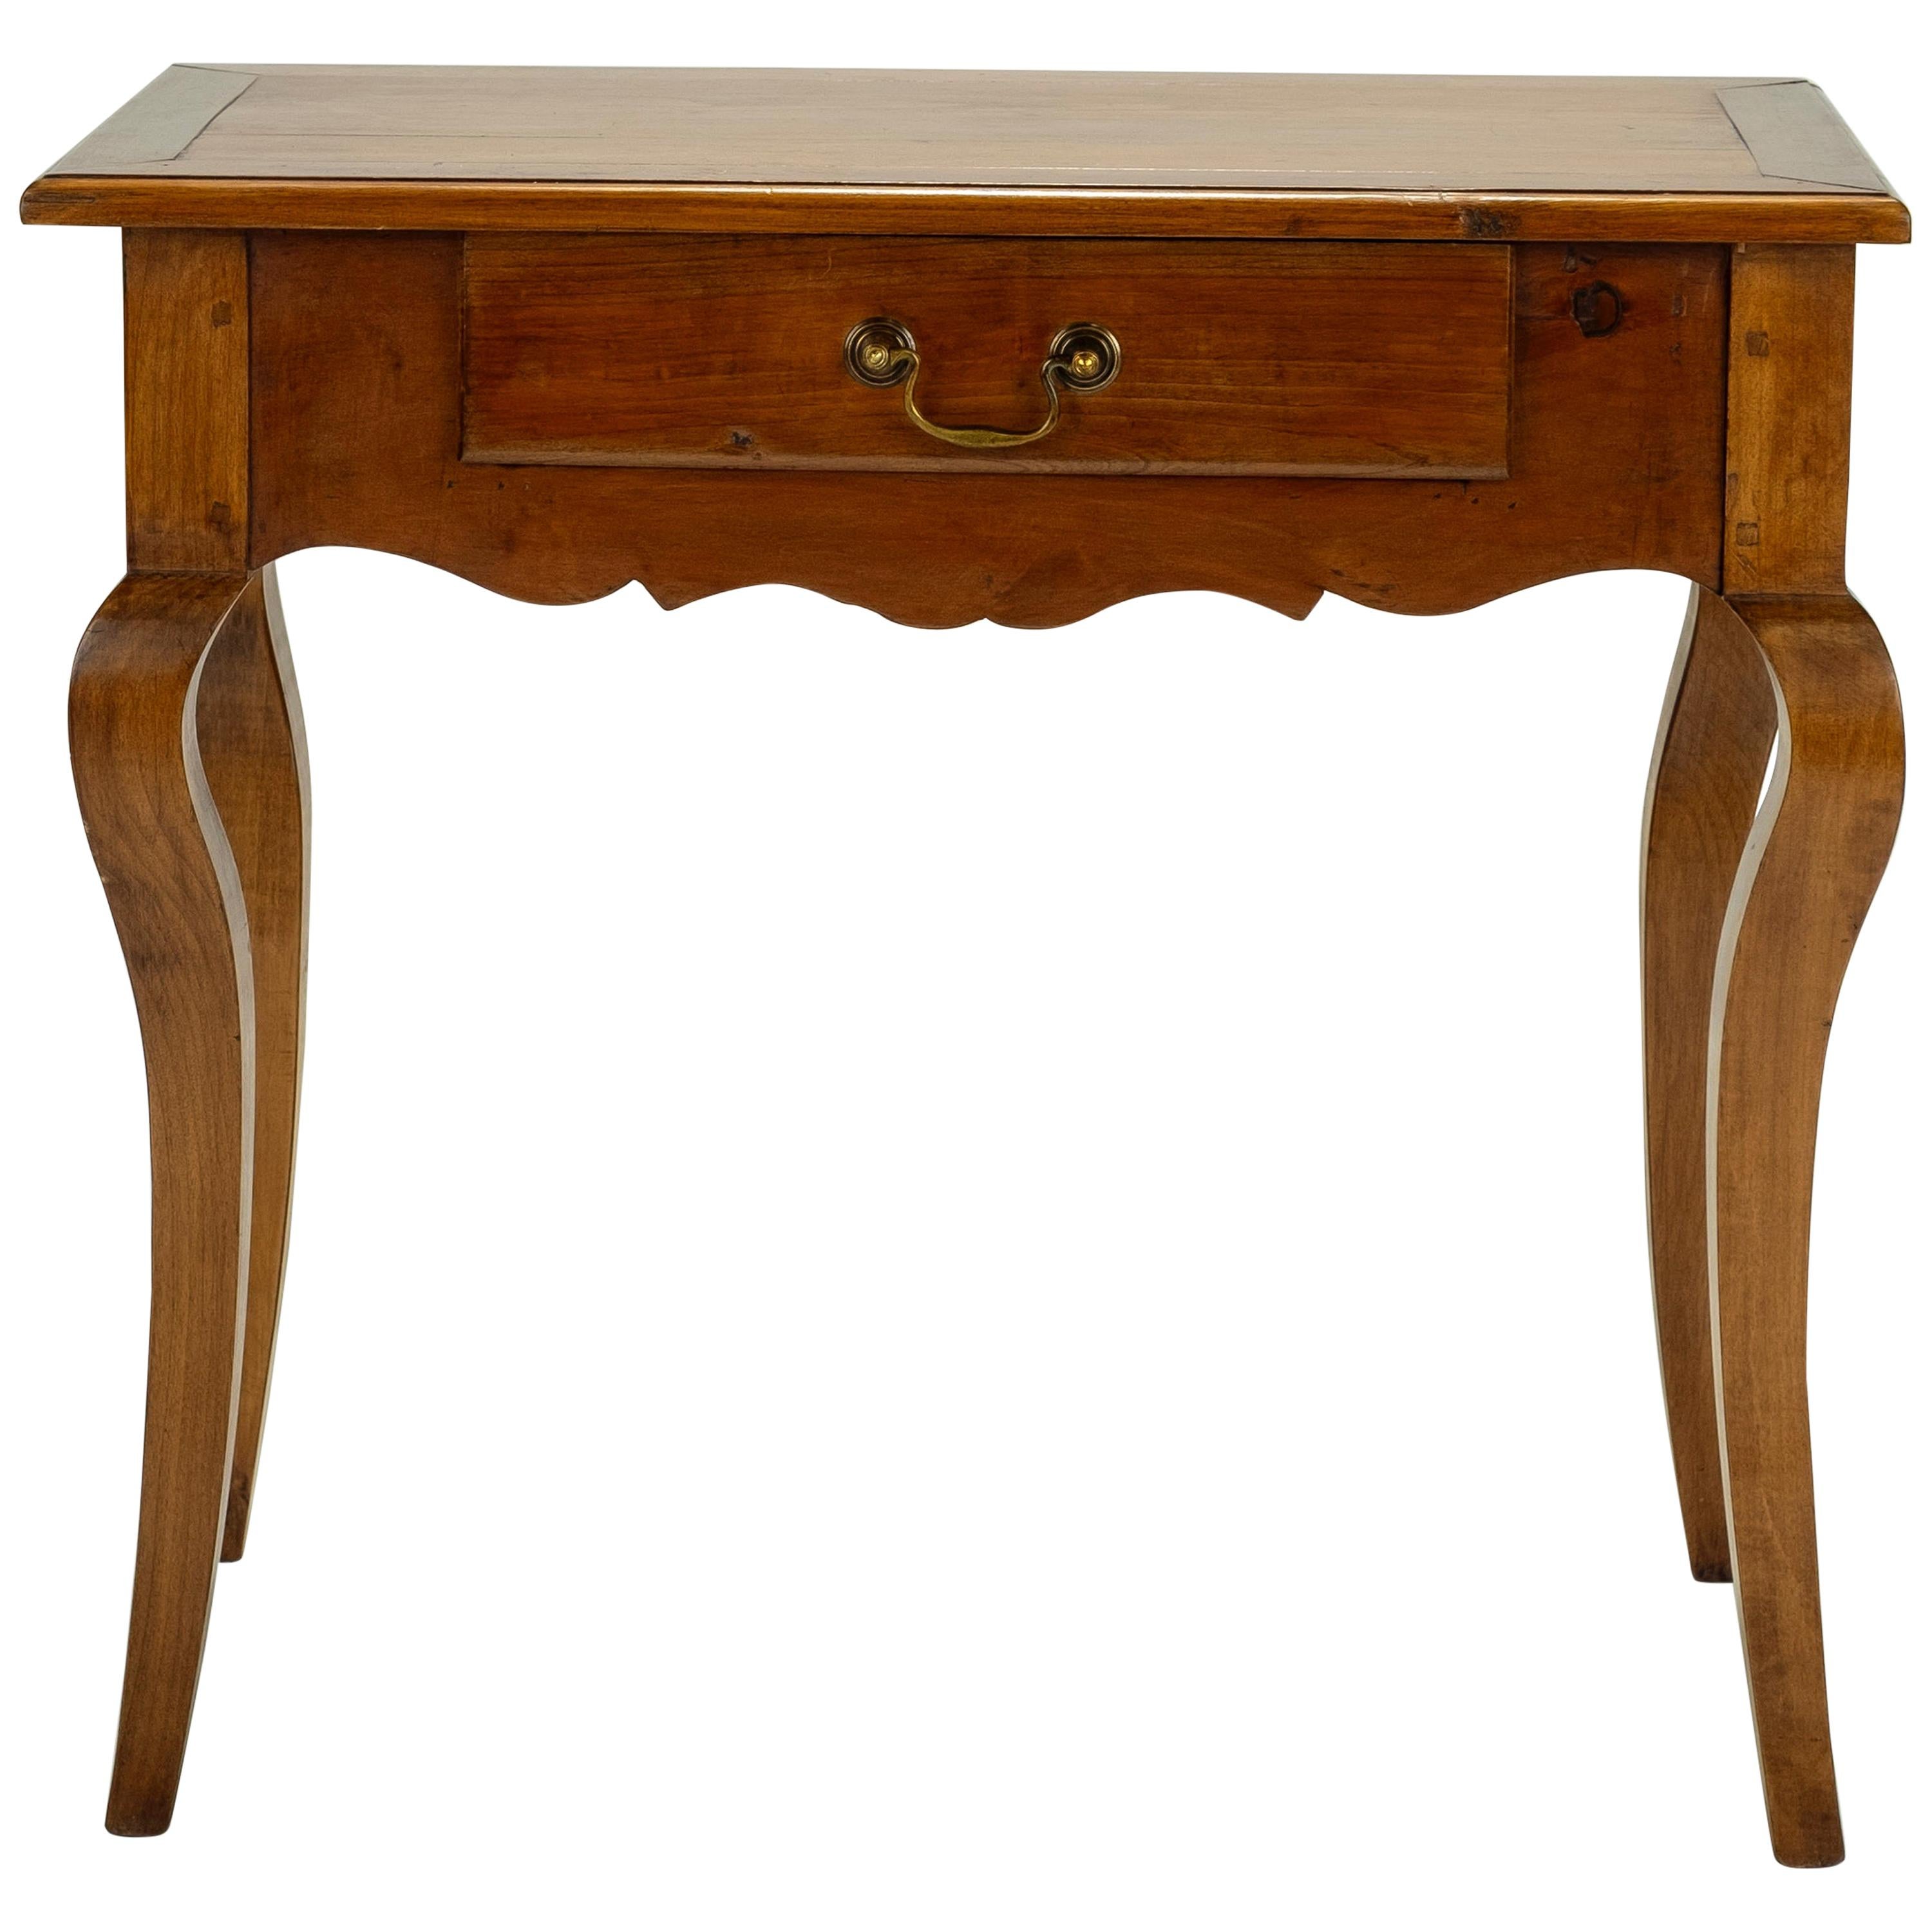 French Cabriole Leg Side Table